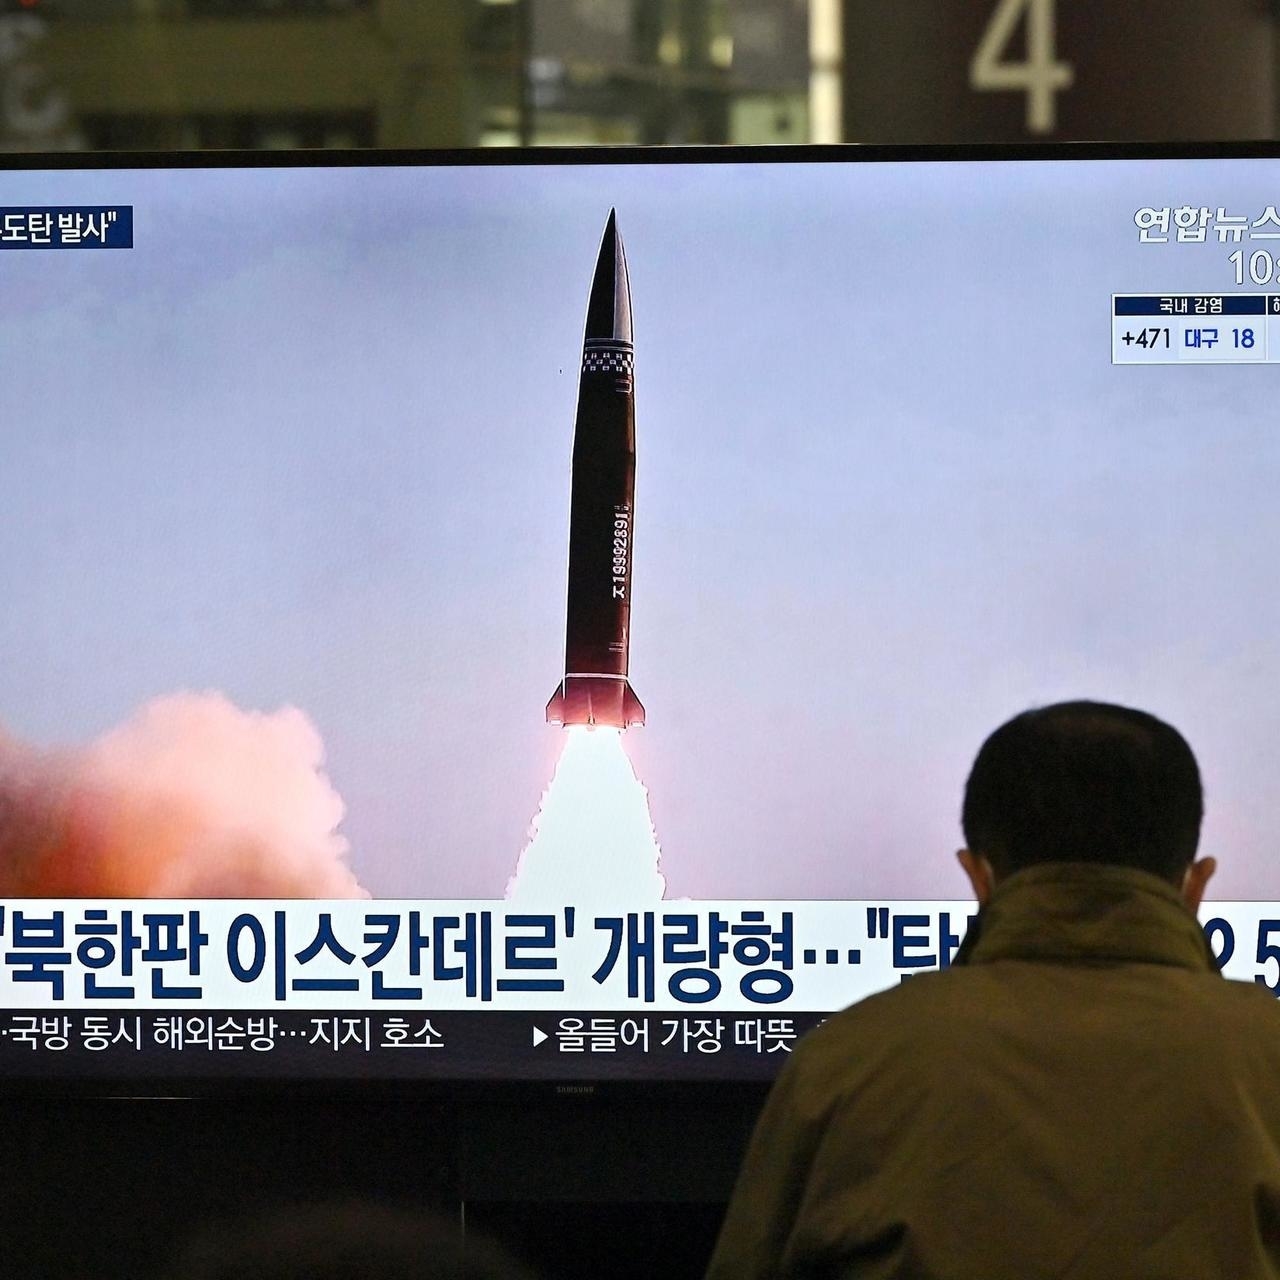 North Korea Accuses UN of Double Standard Over Missile Firings